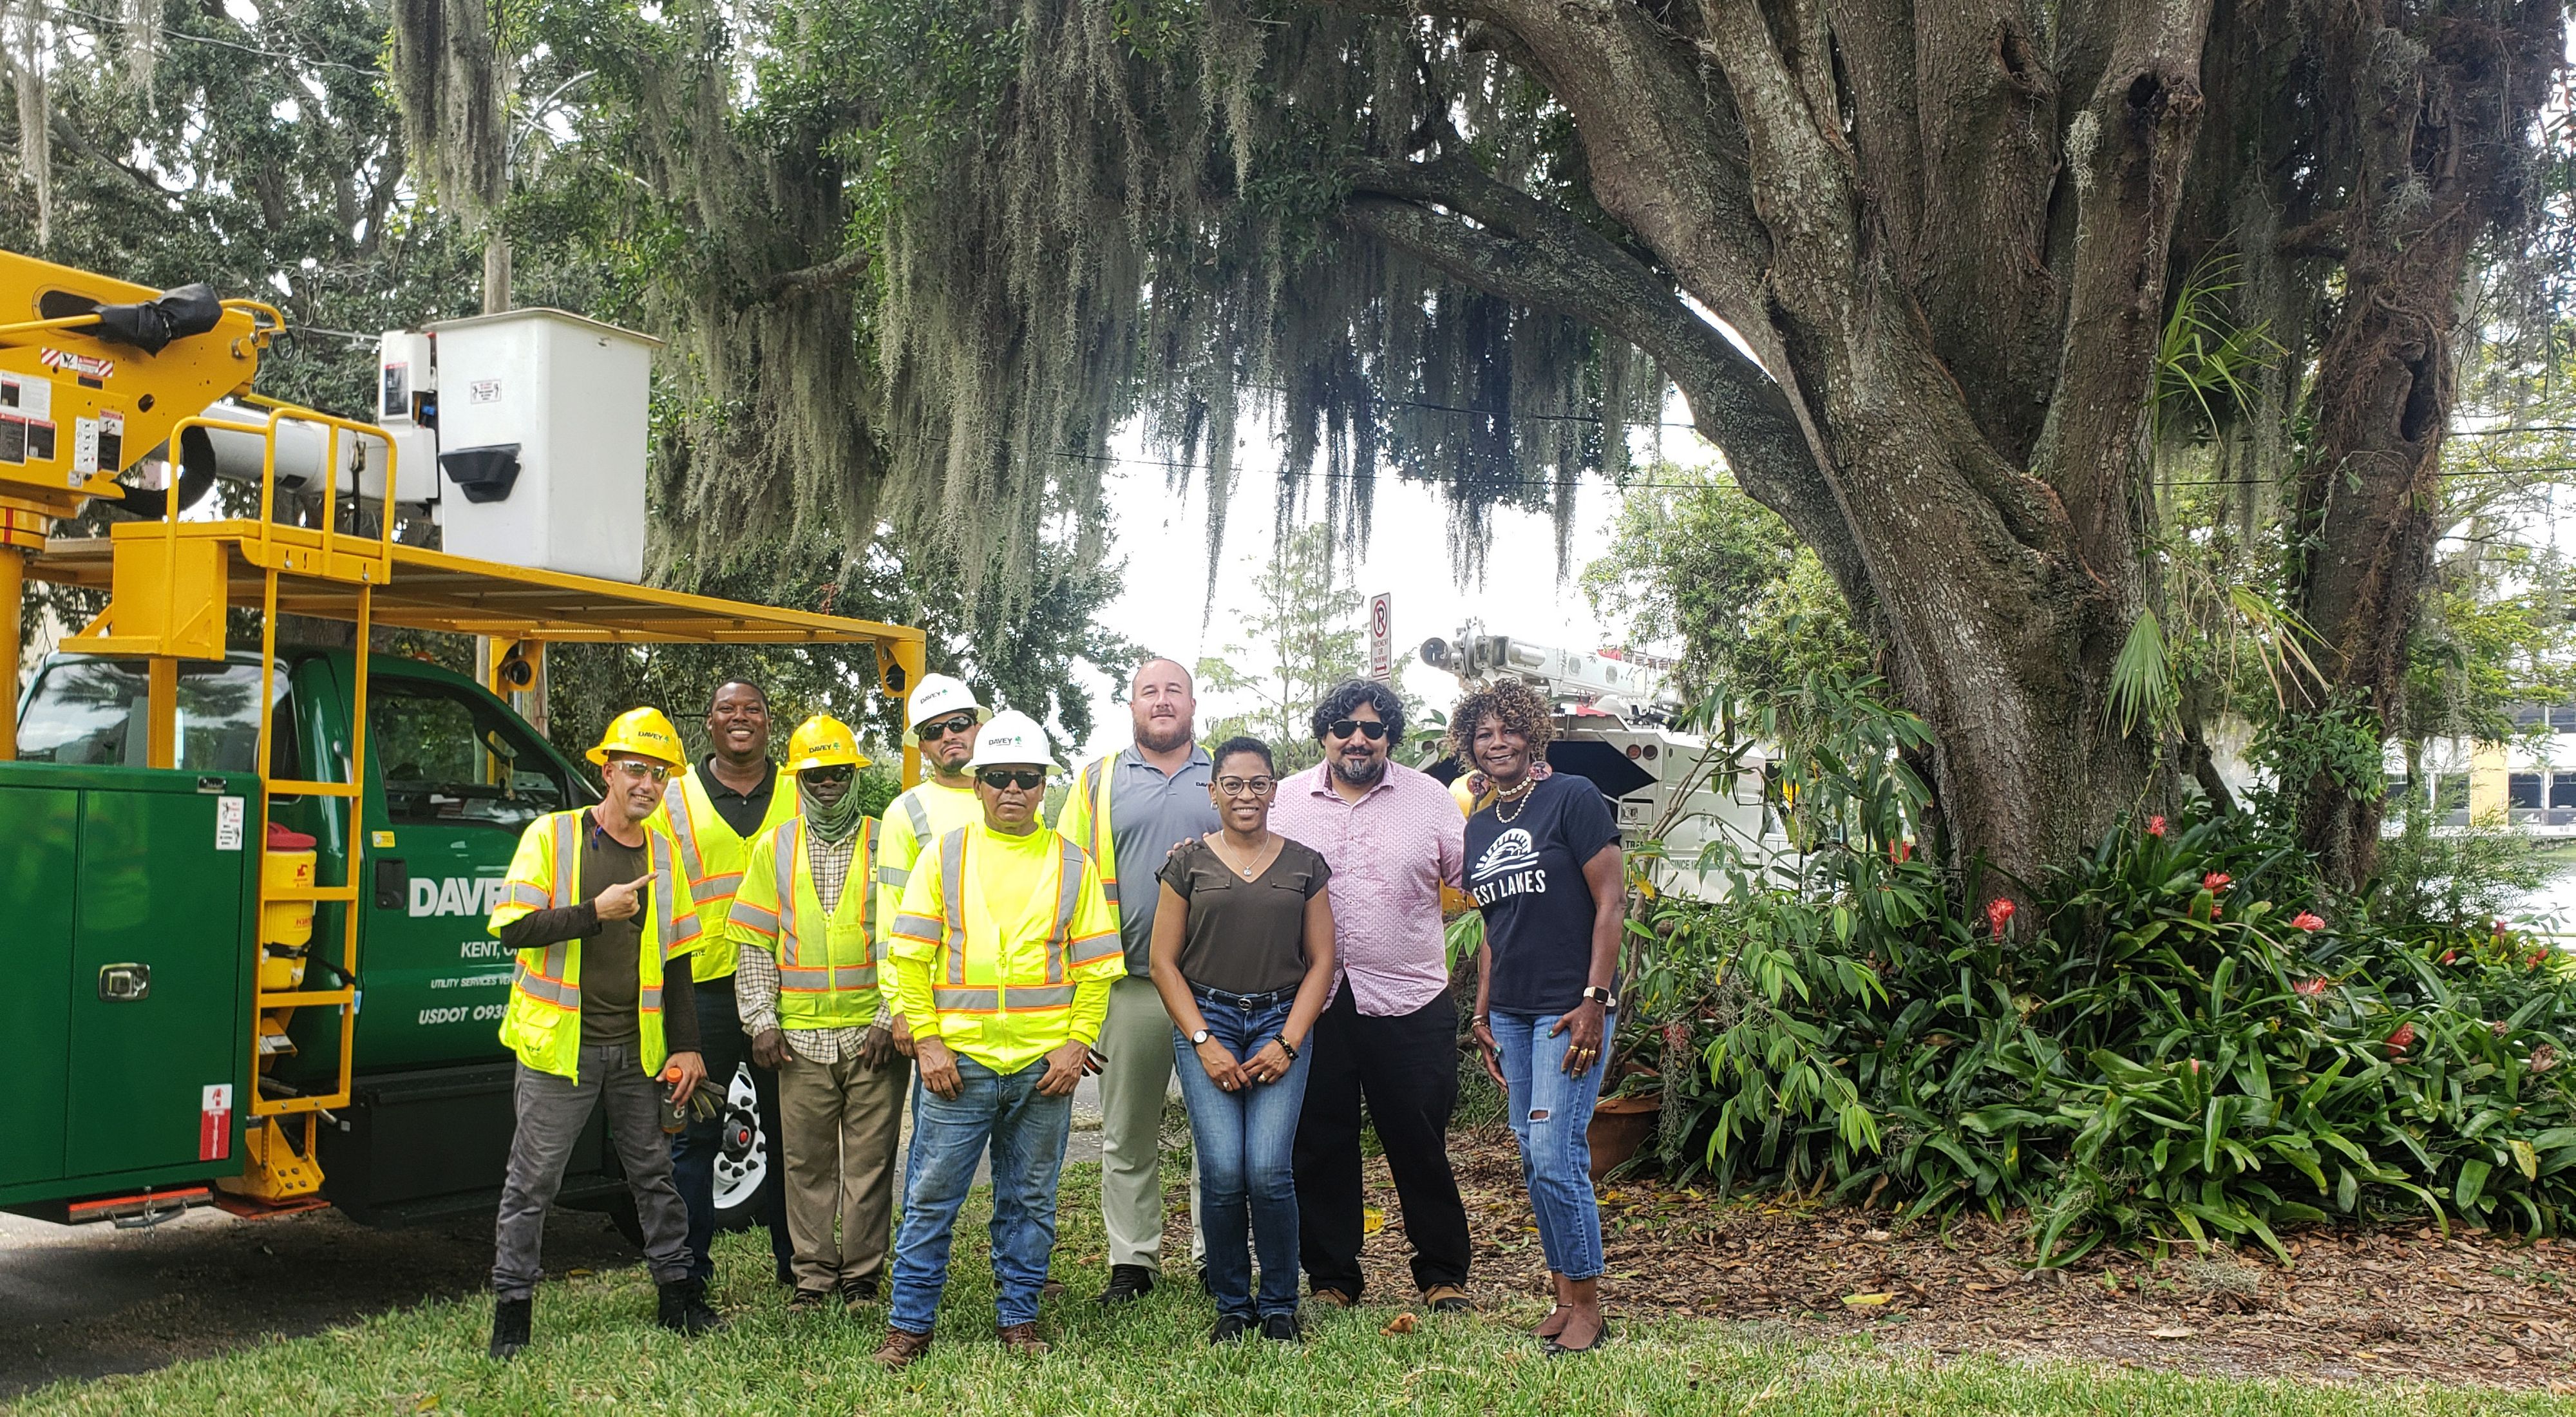 TNC and partners stand next to a tree pruning truck in Orlando, Florida.